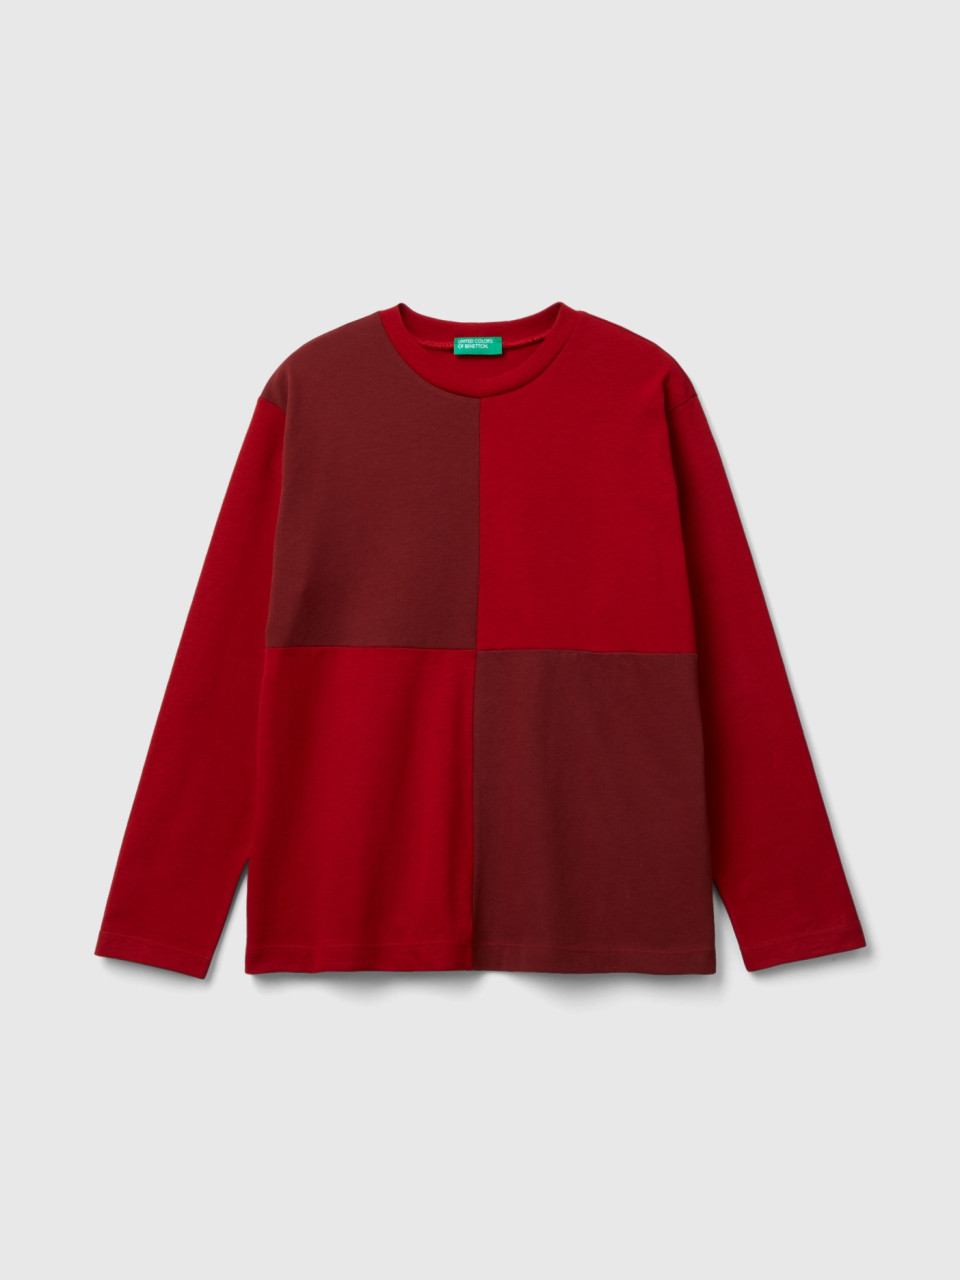 Benetton, T-shirt With Maxi Check, Red, Kids